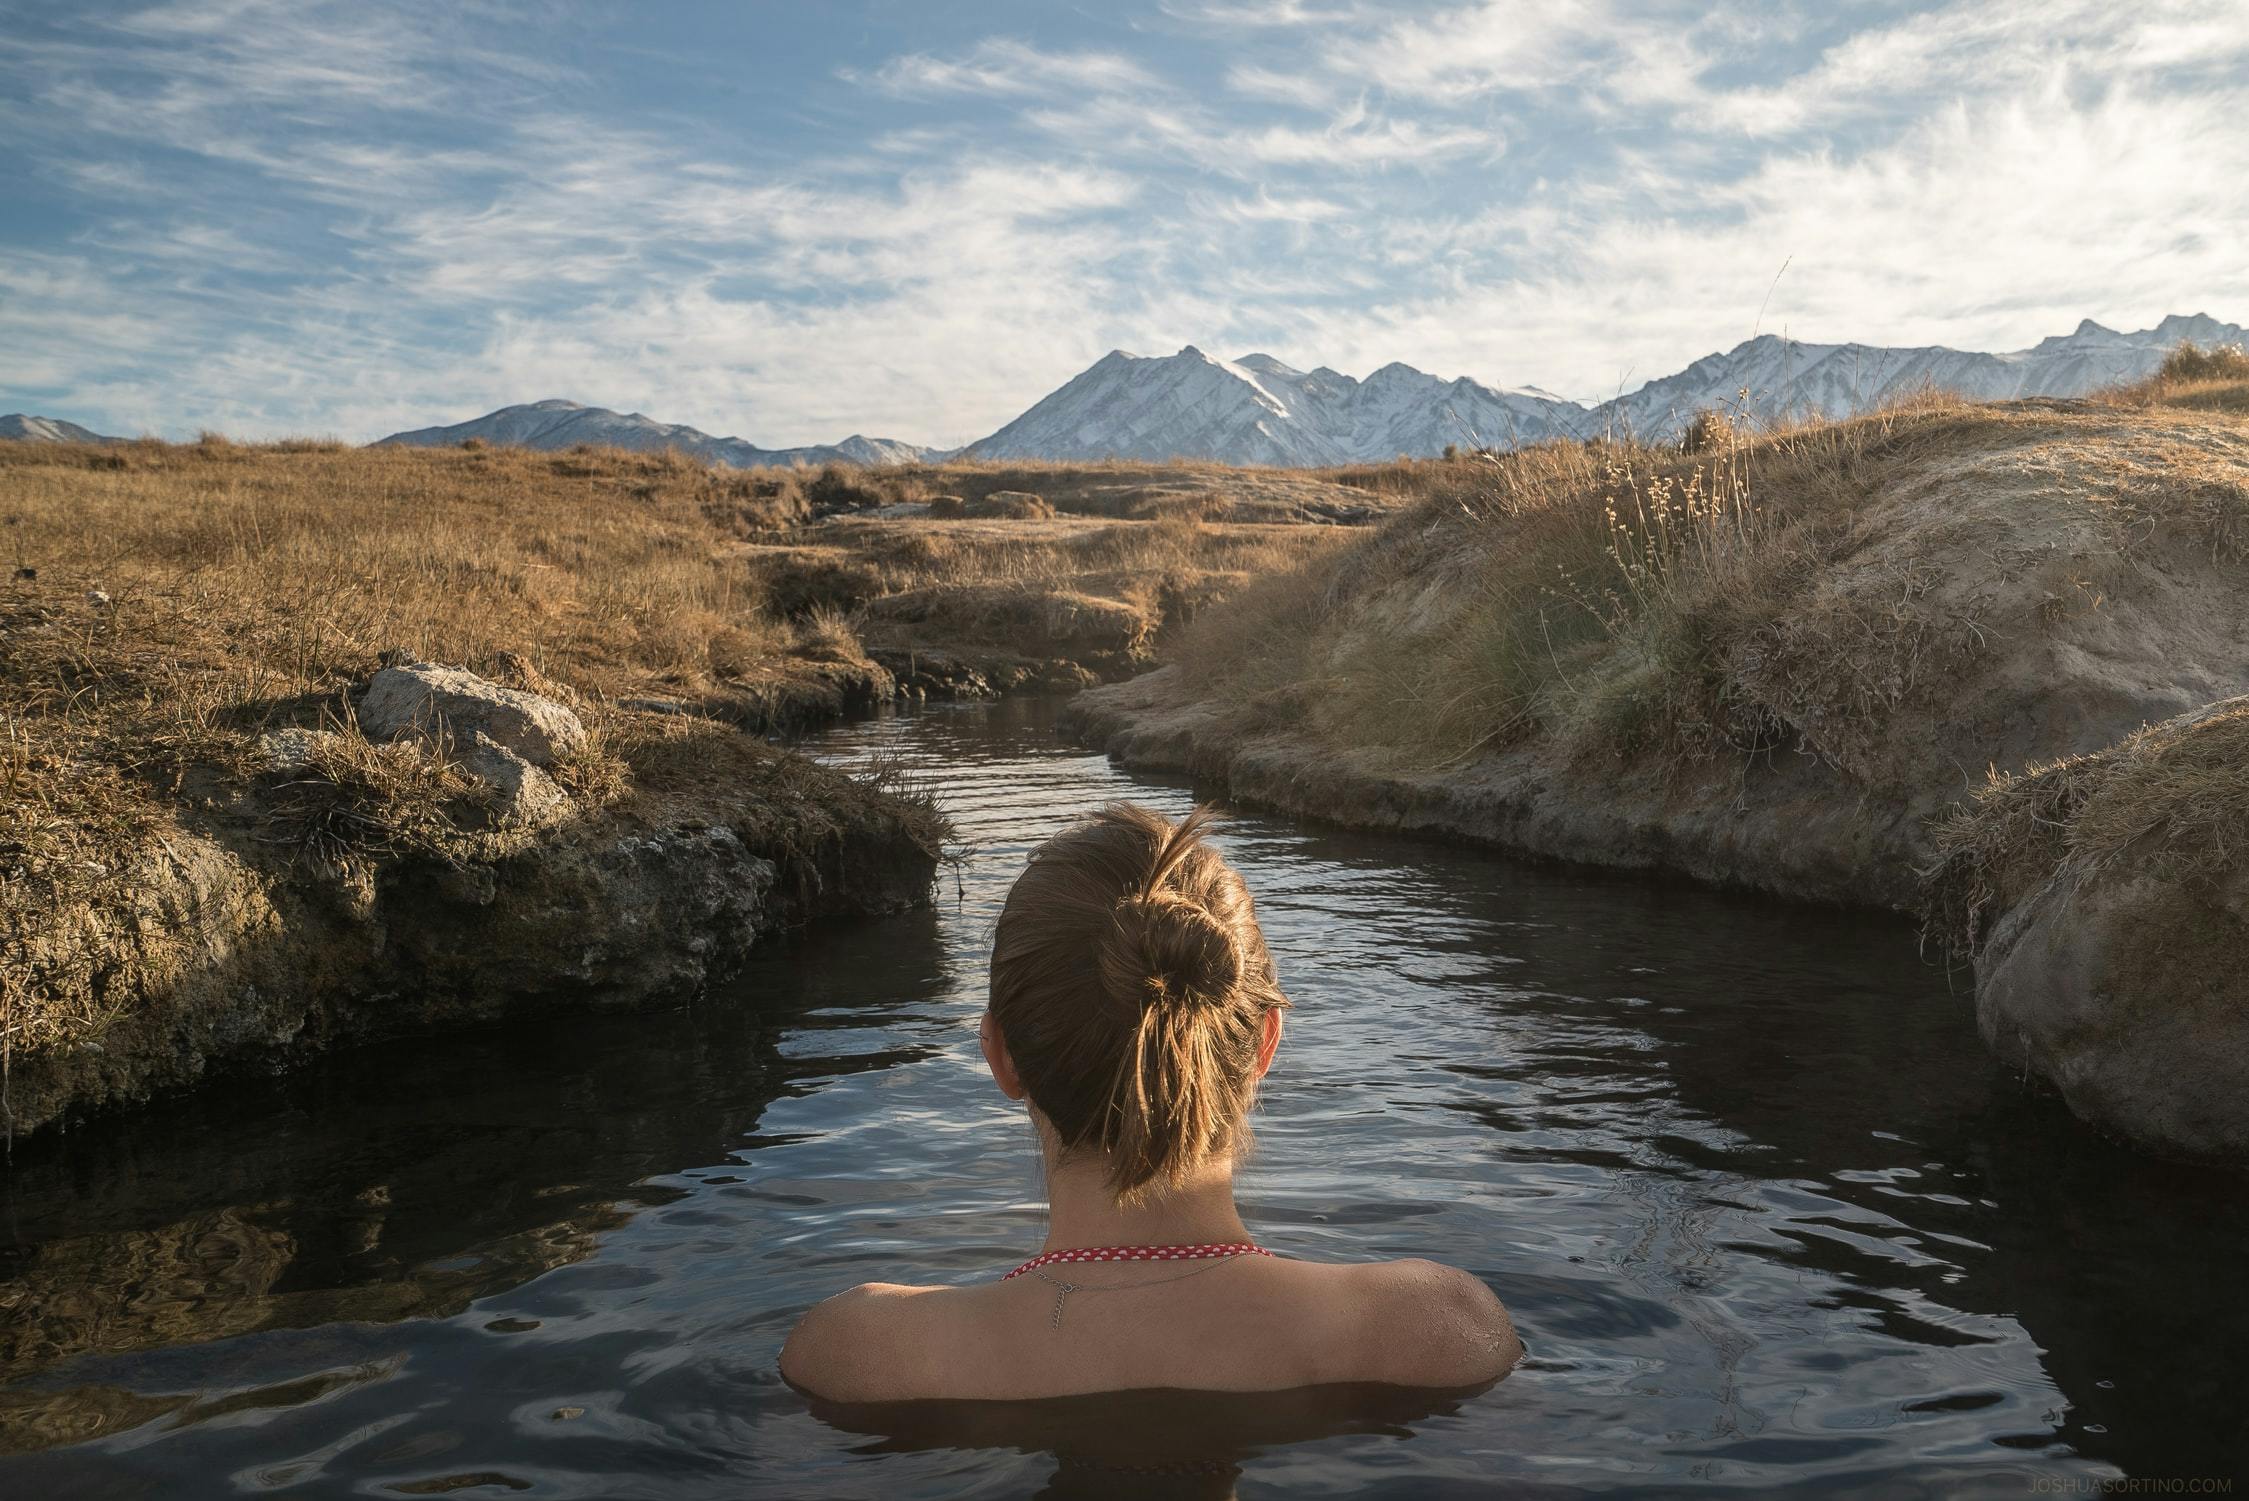 A woman in a hot springs looking out at the mountains in the distance